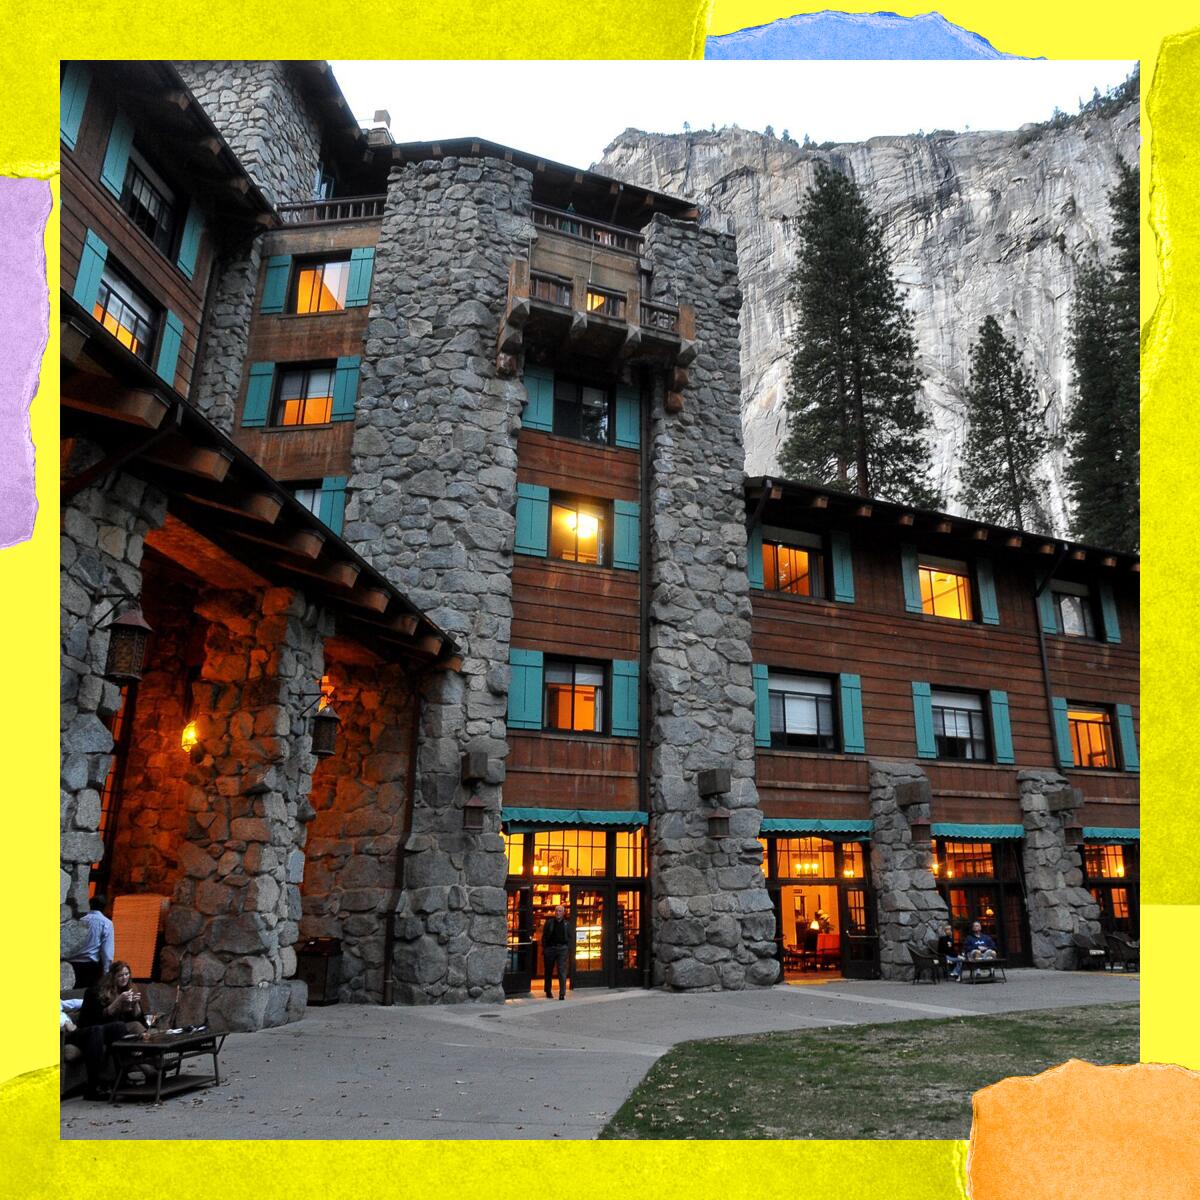 A towering hotel with a rounded-stone facade, with mountains and evergreens towering even higher in the background.